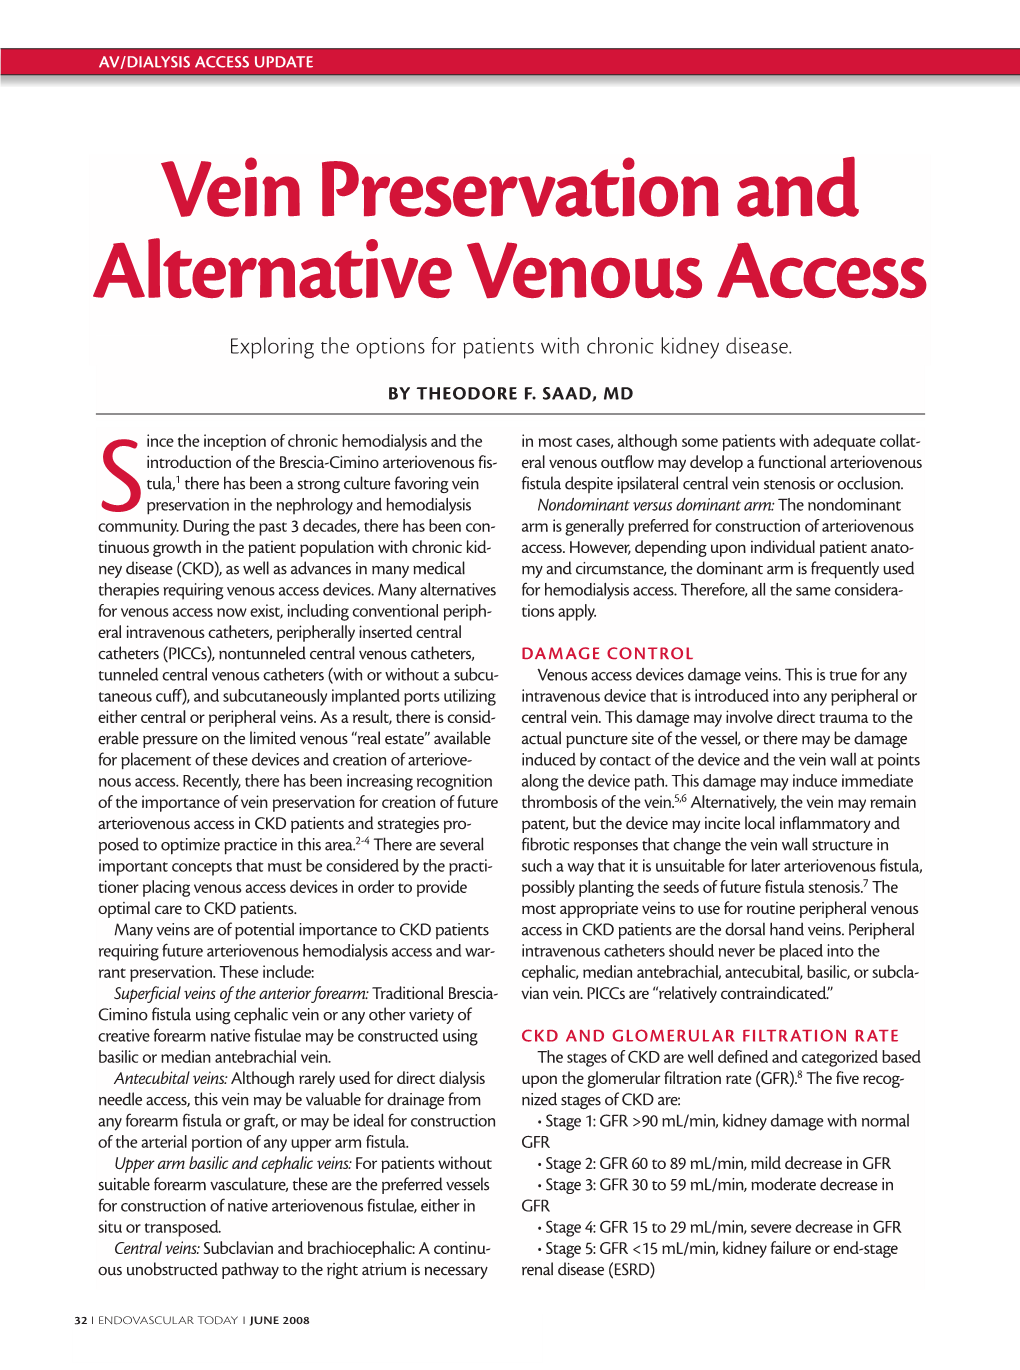 Vein Preservation and Alternative Venous Access Exploring the Options for Patients with Chronic Kidney Disease